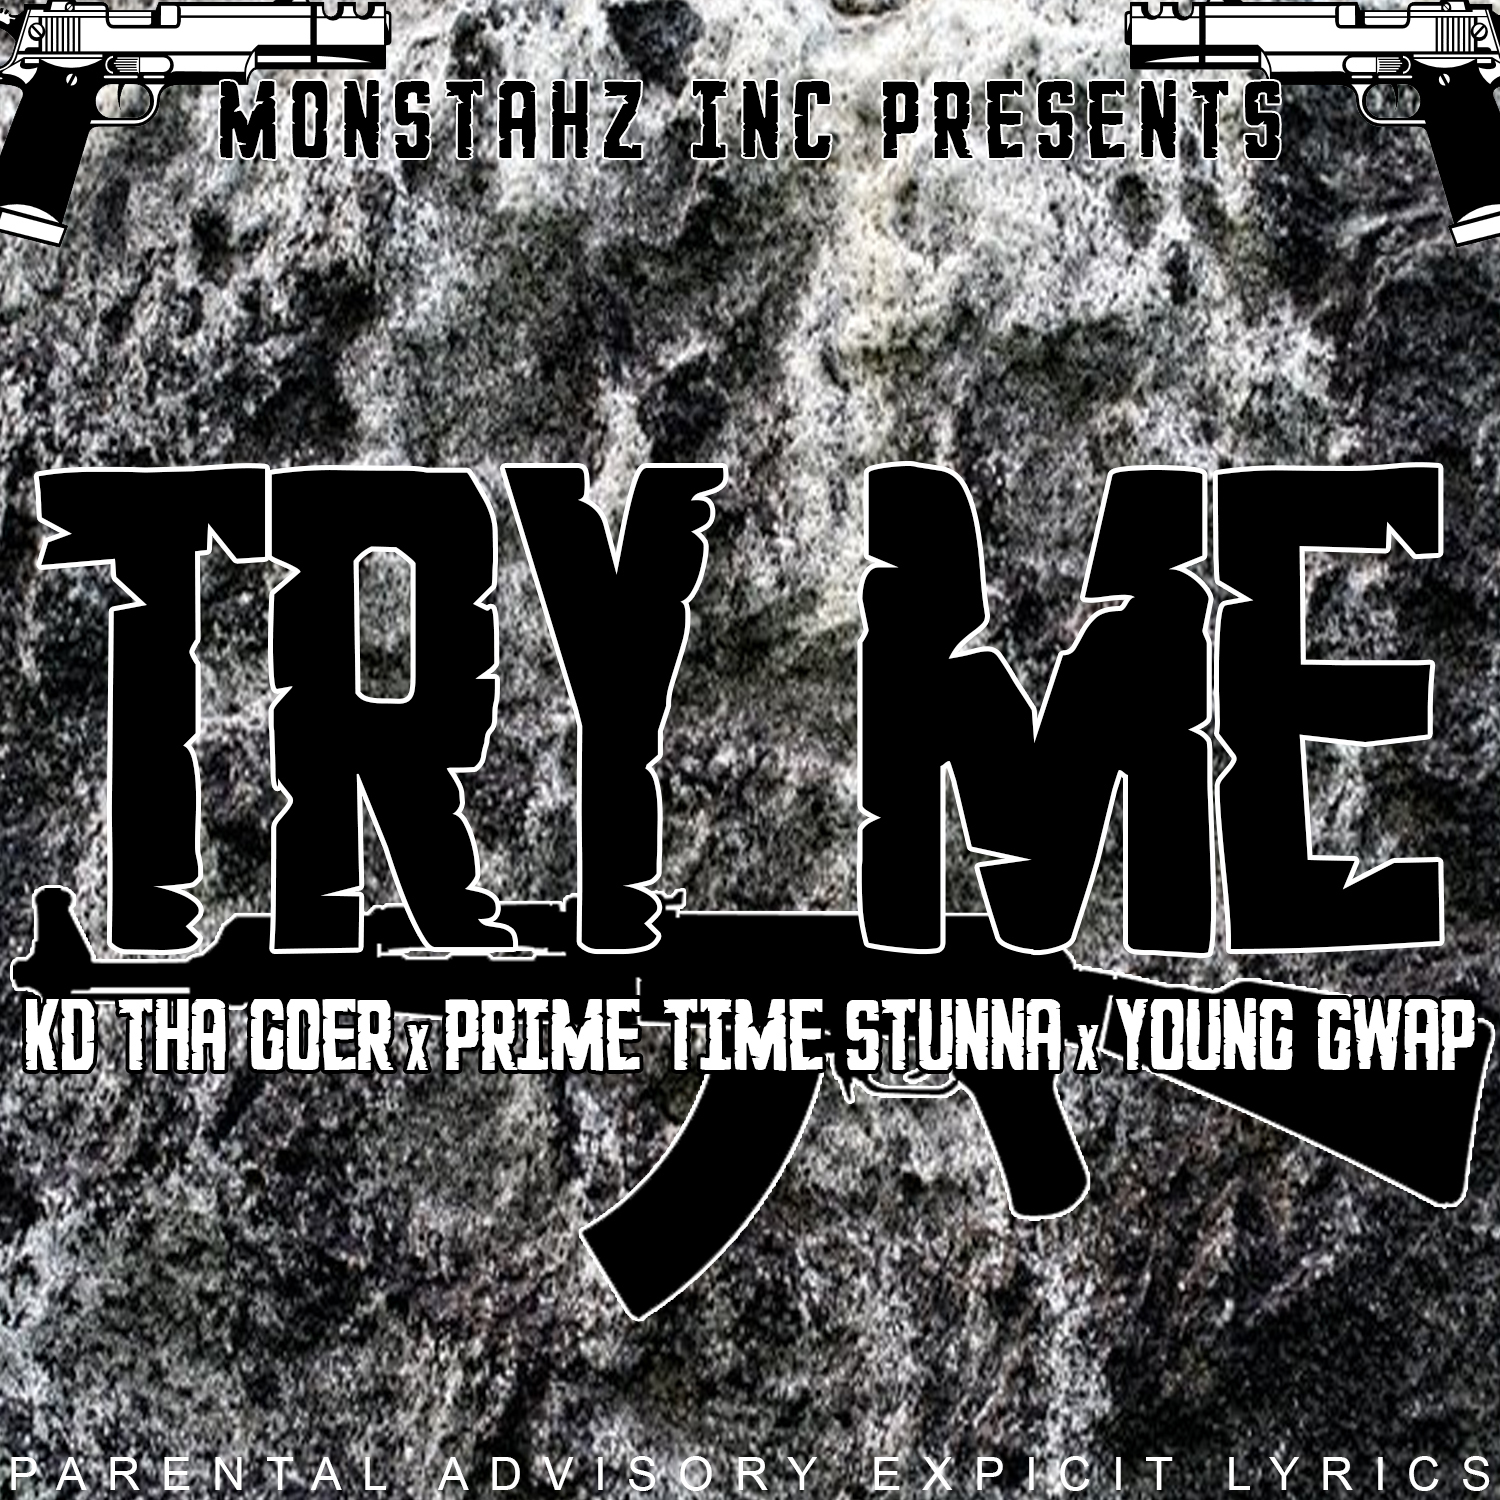 Prime Time Stunna ft. KD Tha Goer & Young Gwap - Try Me [Thizzler.com]